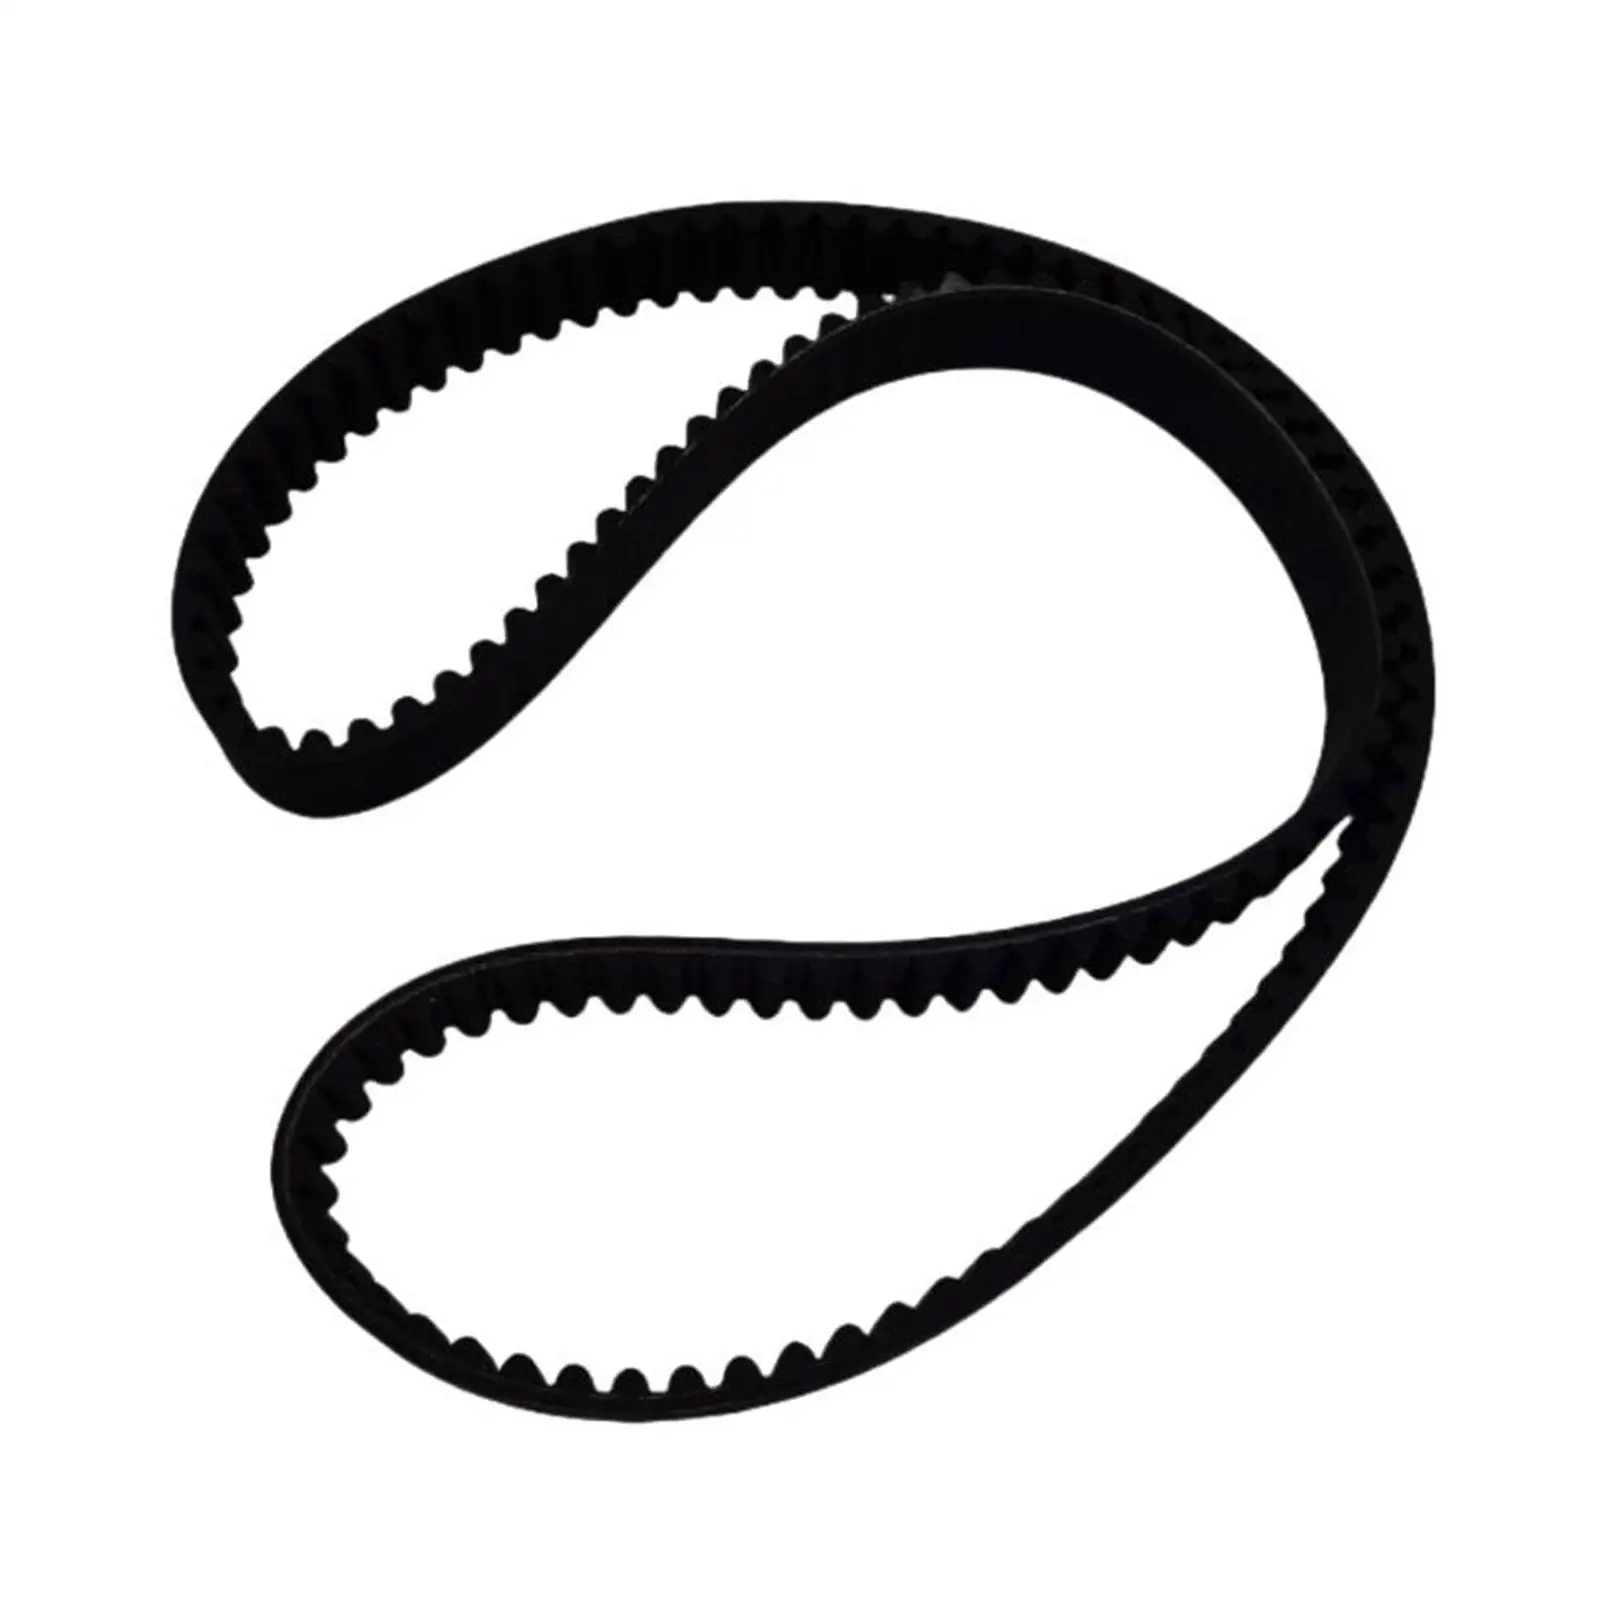 

1 1/2" Wide Rear Drive Belt 40023-86 132 Teeth Accessories Replace Parts for Harley Davidson Easy Installation Professional